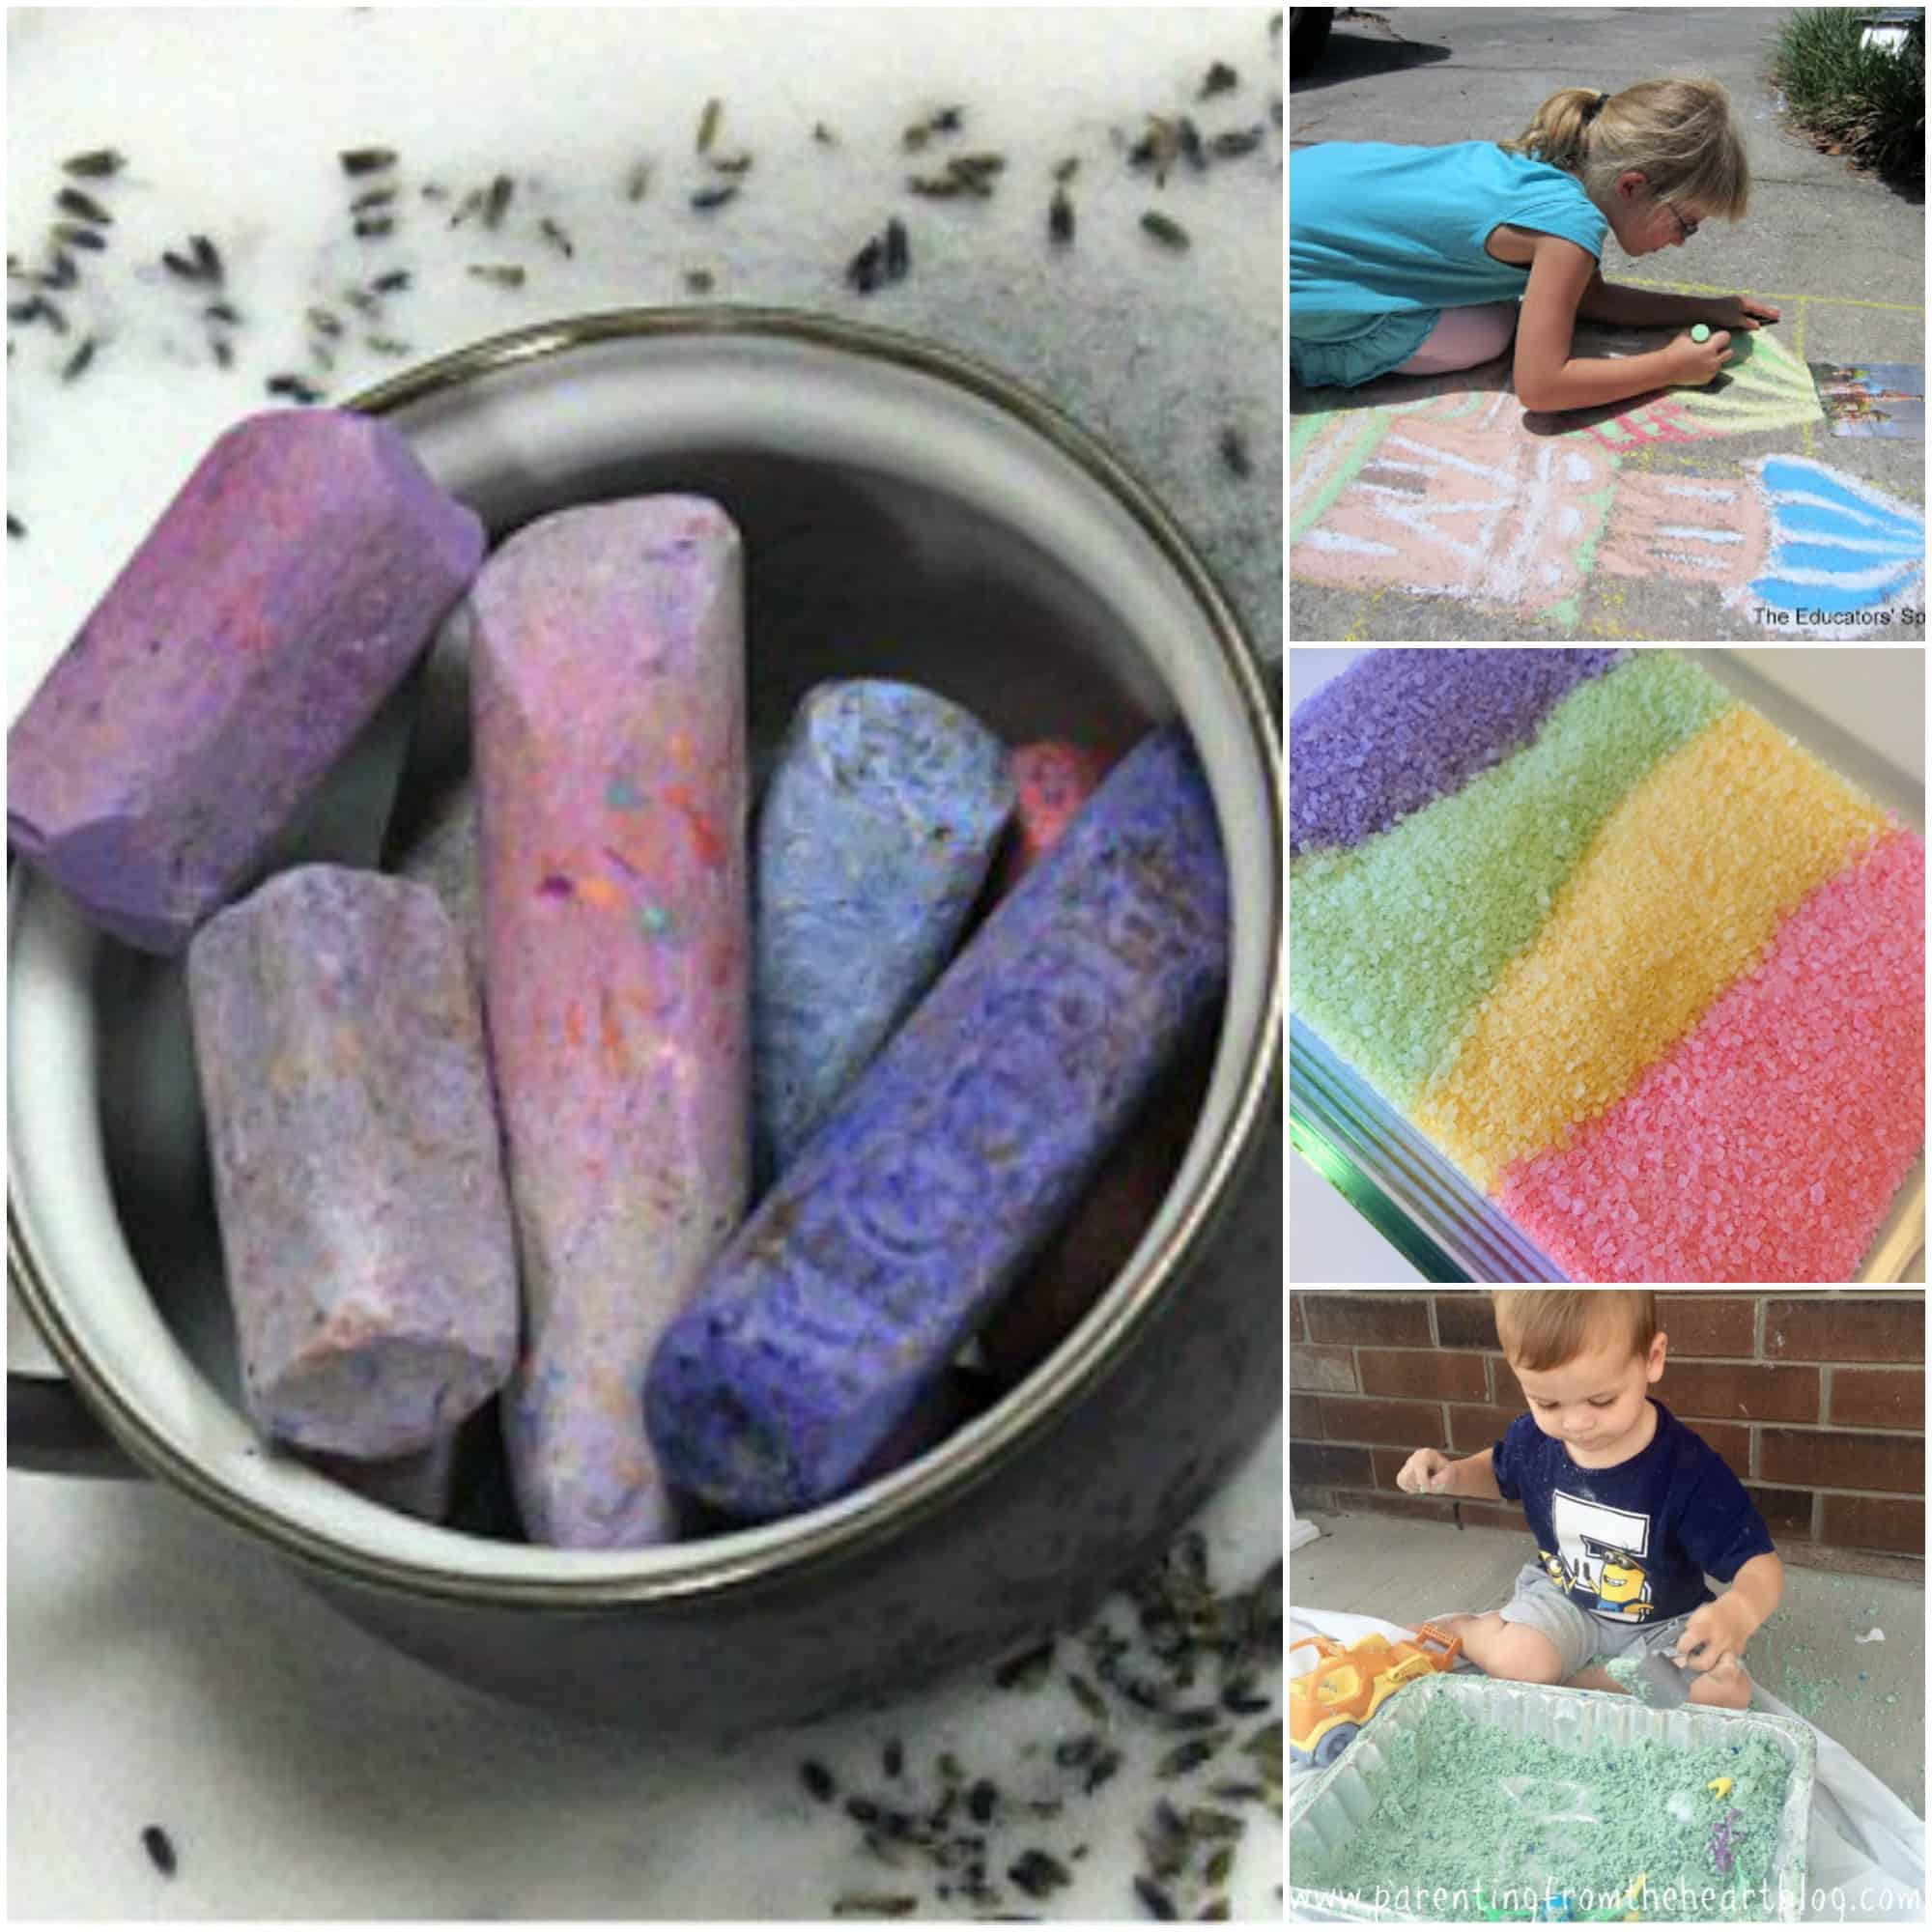 At the end of the summer, we are left with a lot of broken down chalk. There are sensory play ideas, kids arts and crafts, STEM, STEAM, and so many more perfect for play-based learning.